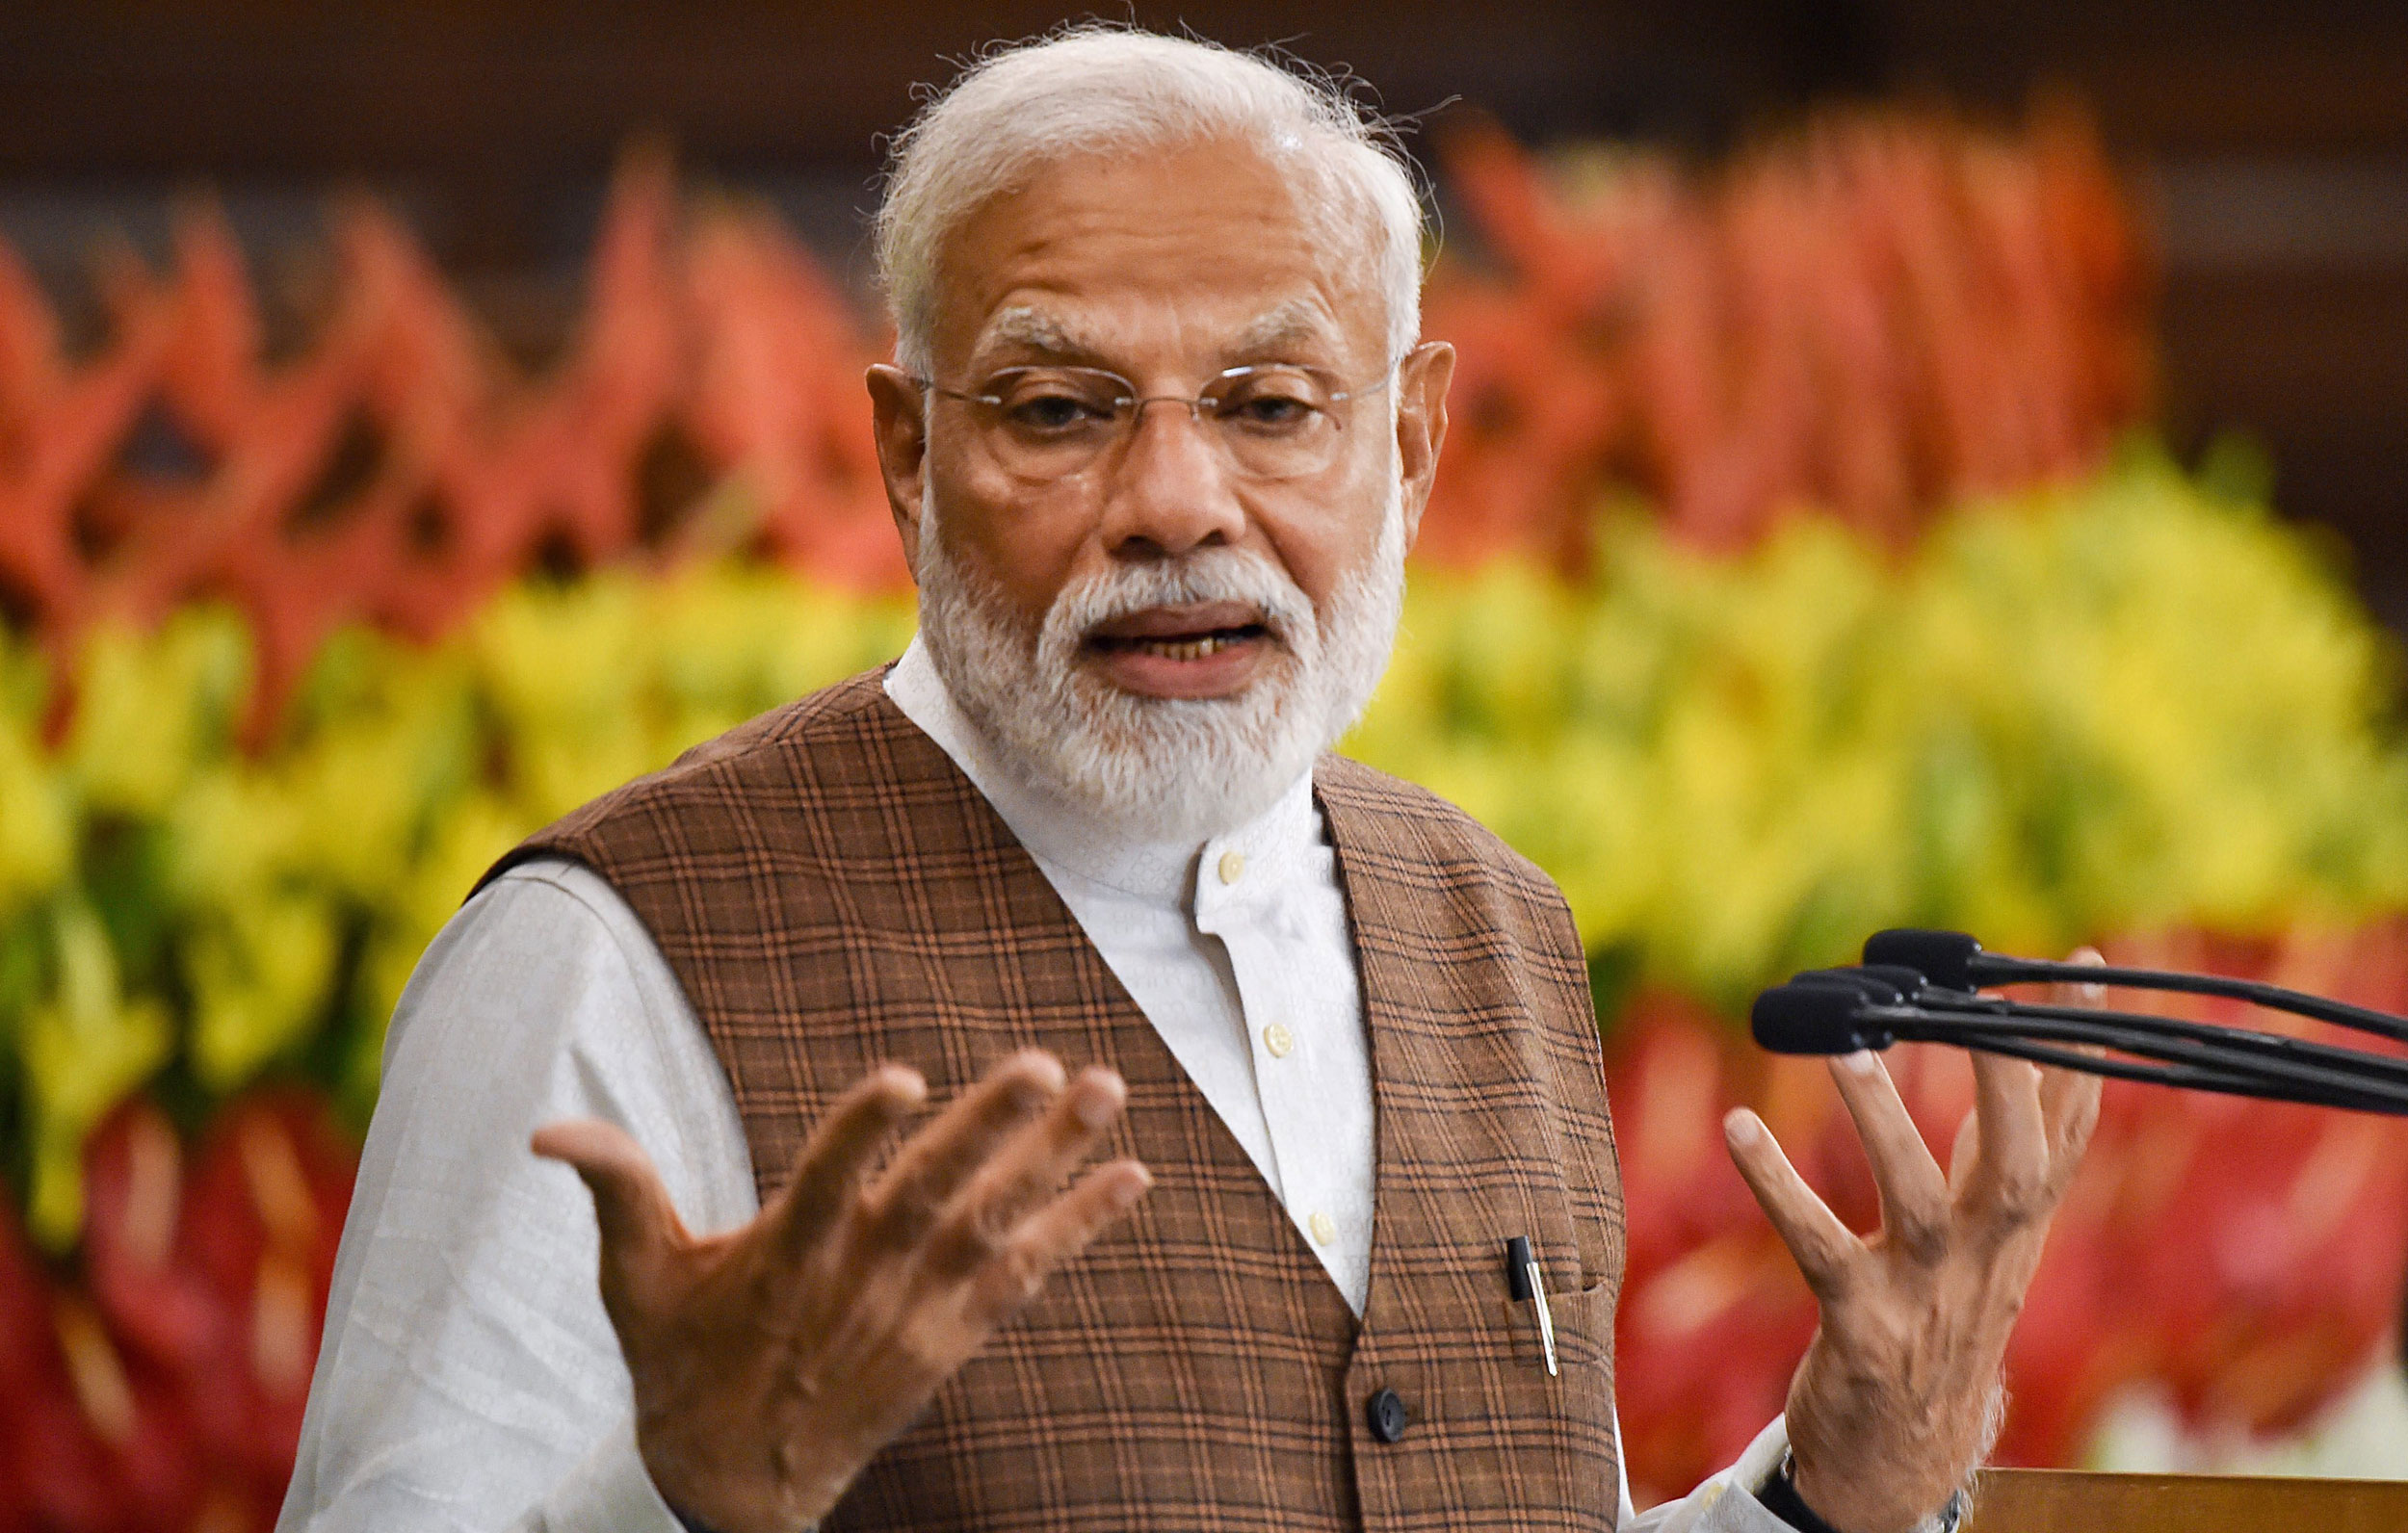 Prime Minister Narendra Modi addresses a parliamentary board meeting in New Delhi on May 25, 2019. Immediately after the election results were declared, his government published GDP figures that showed the lowest quarterly growth in the last five years